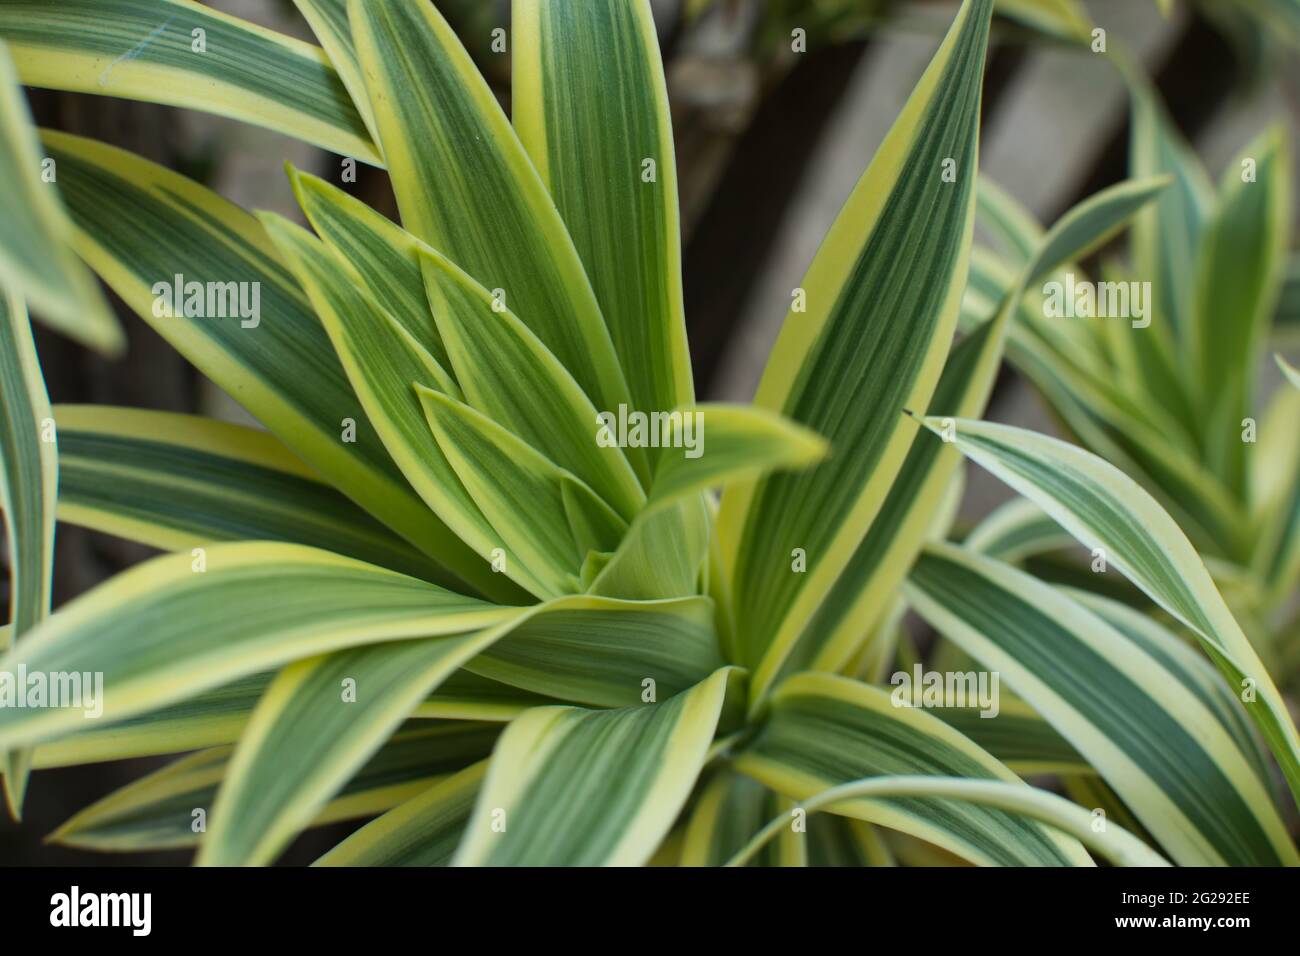 Dracaena green leaves close up for background. Stock Photo